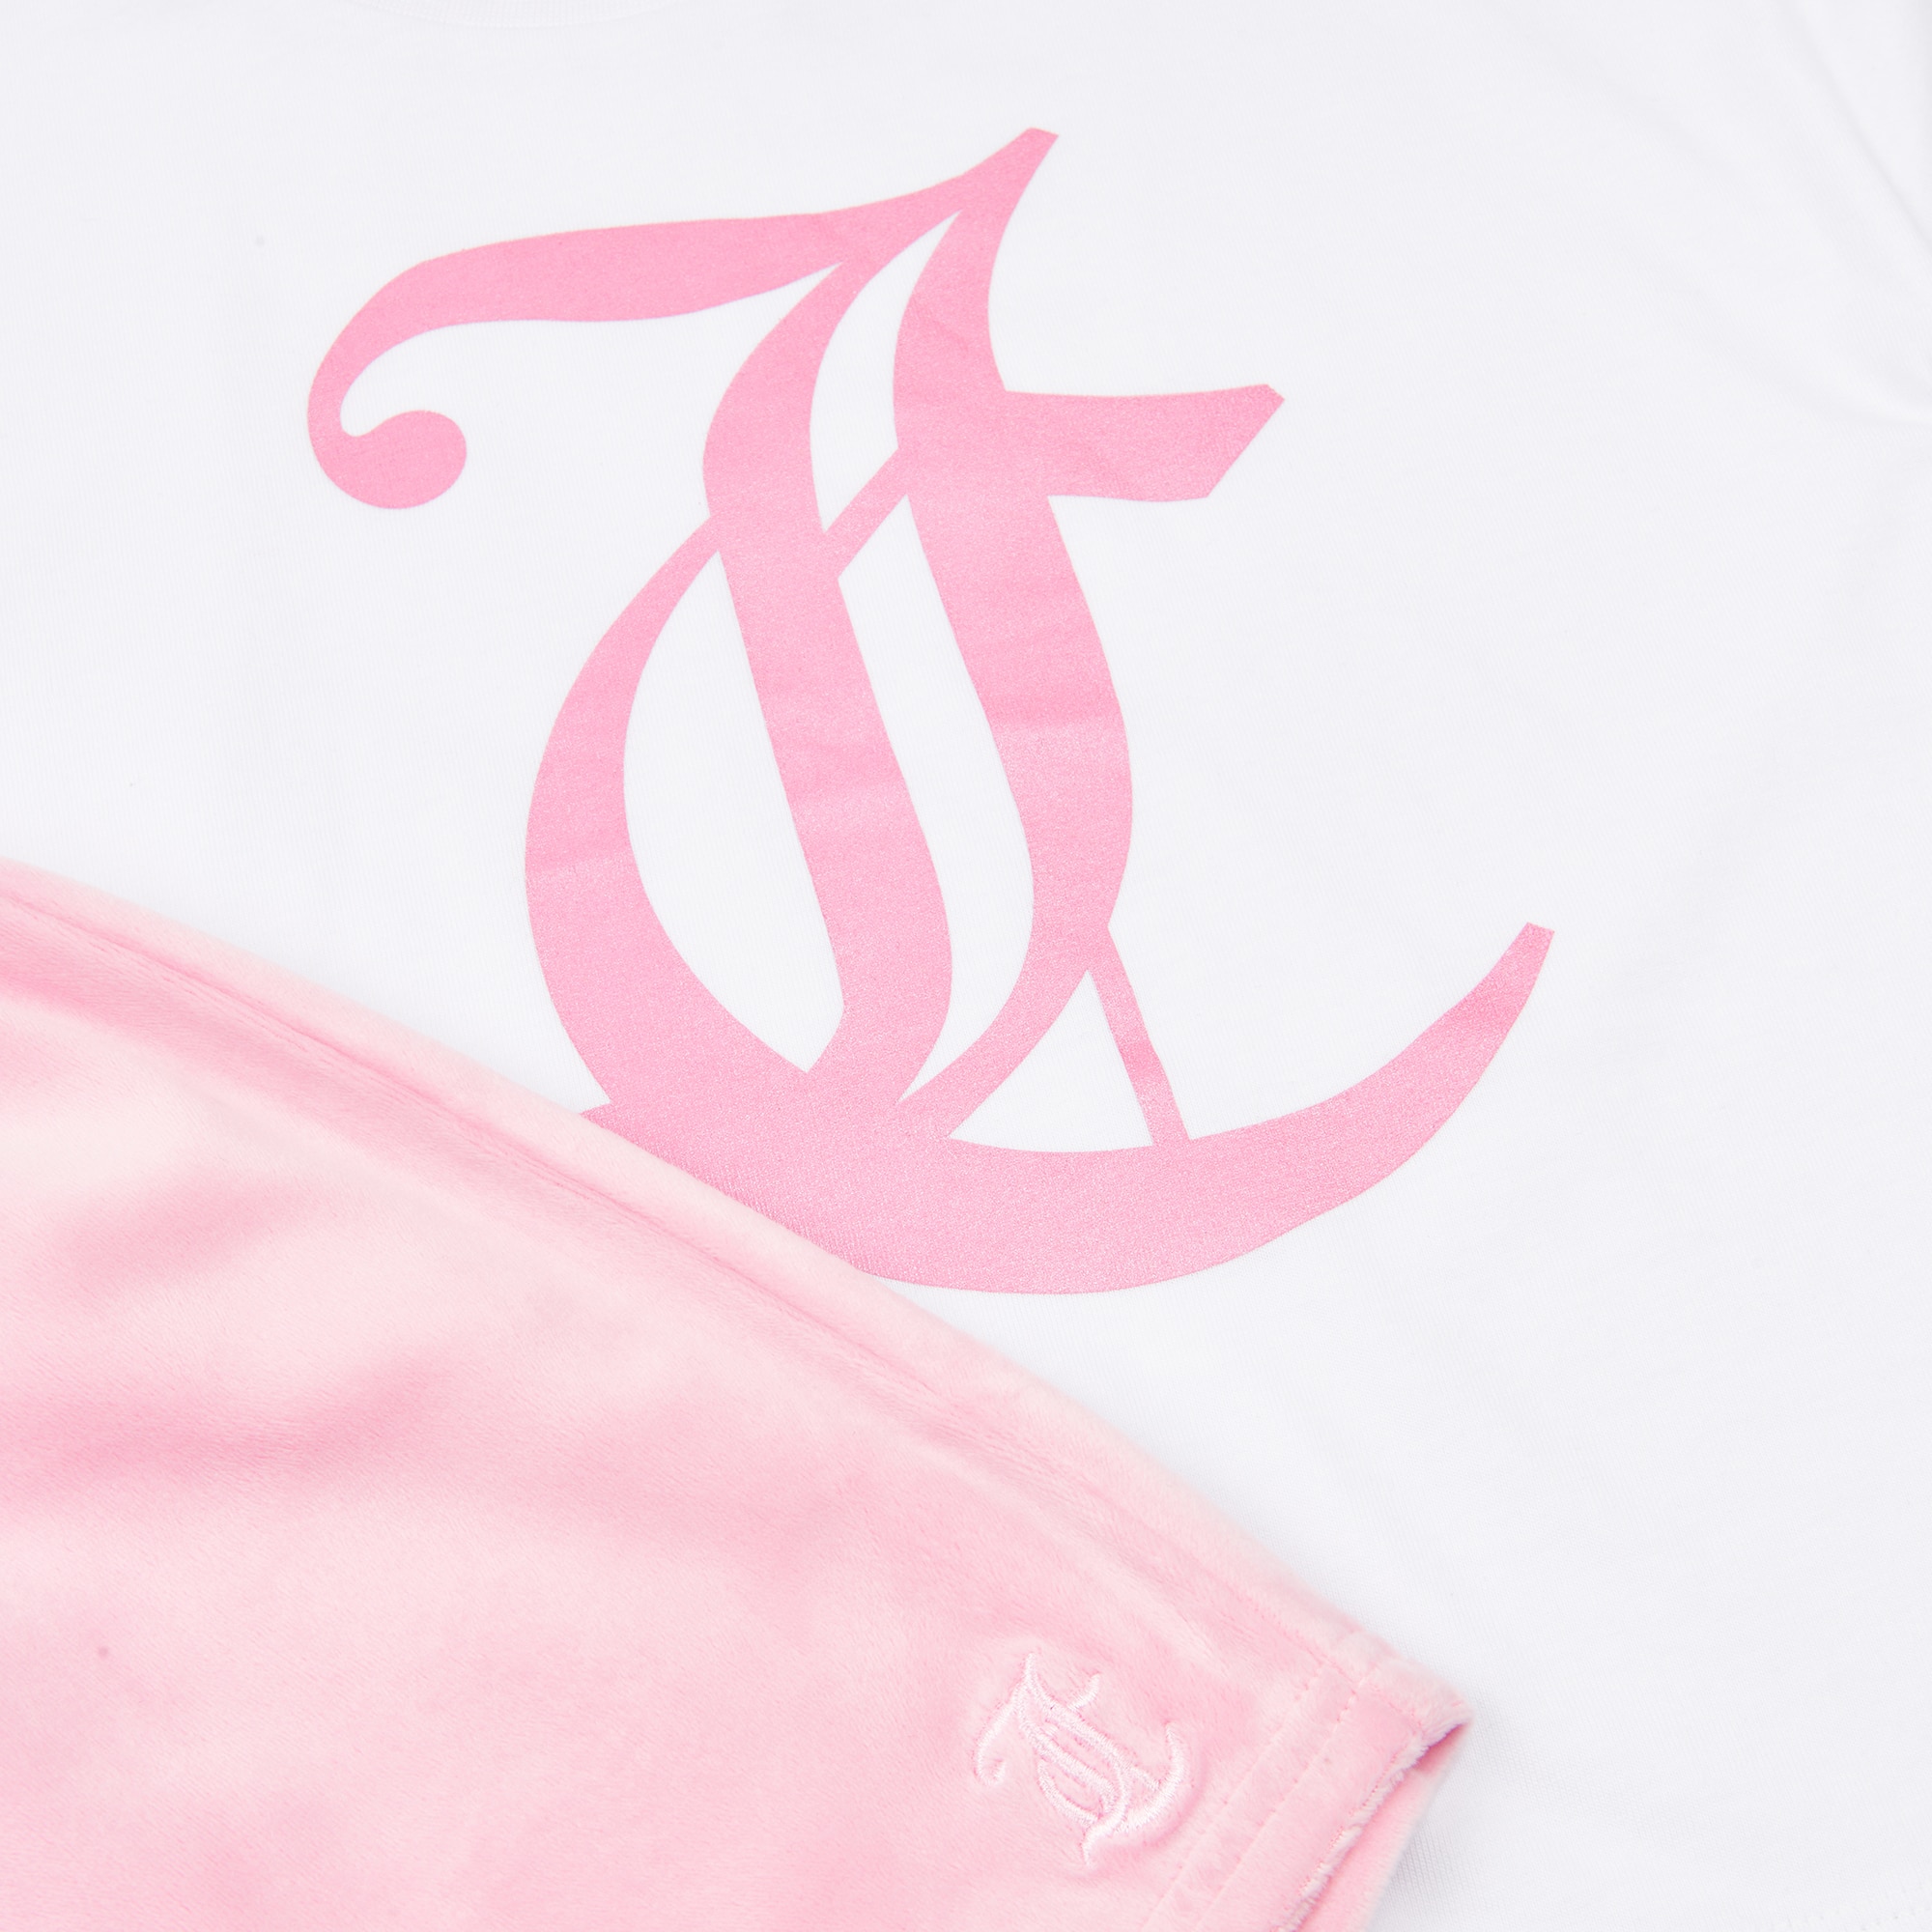 Juicy Couture pink shorts close up